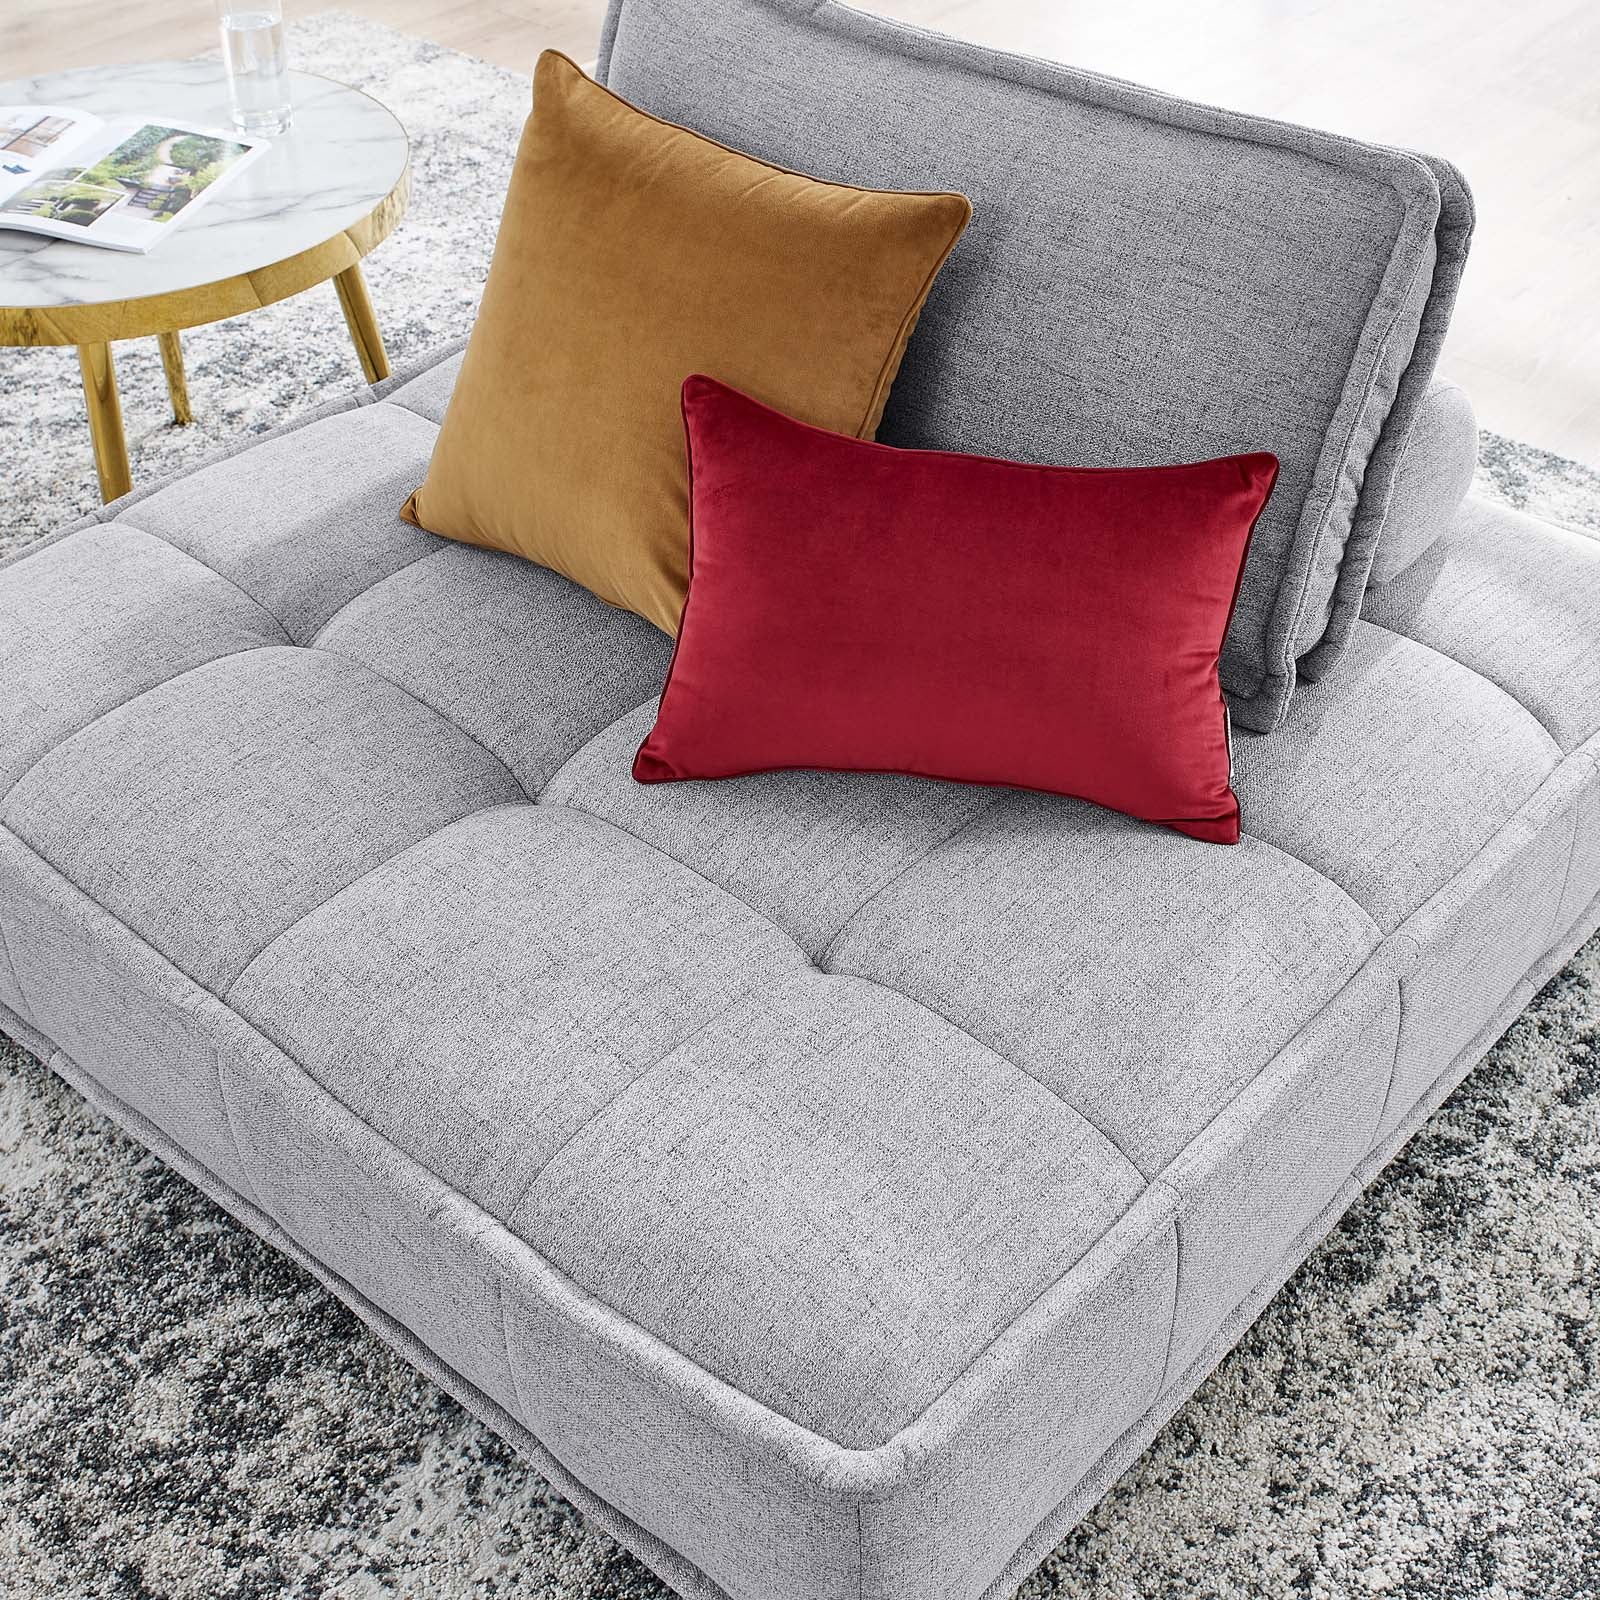 Modway Sleepers & Futons - Saunter Tufted Fabric Armless Chair Light Gray